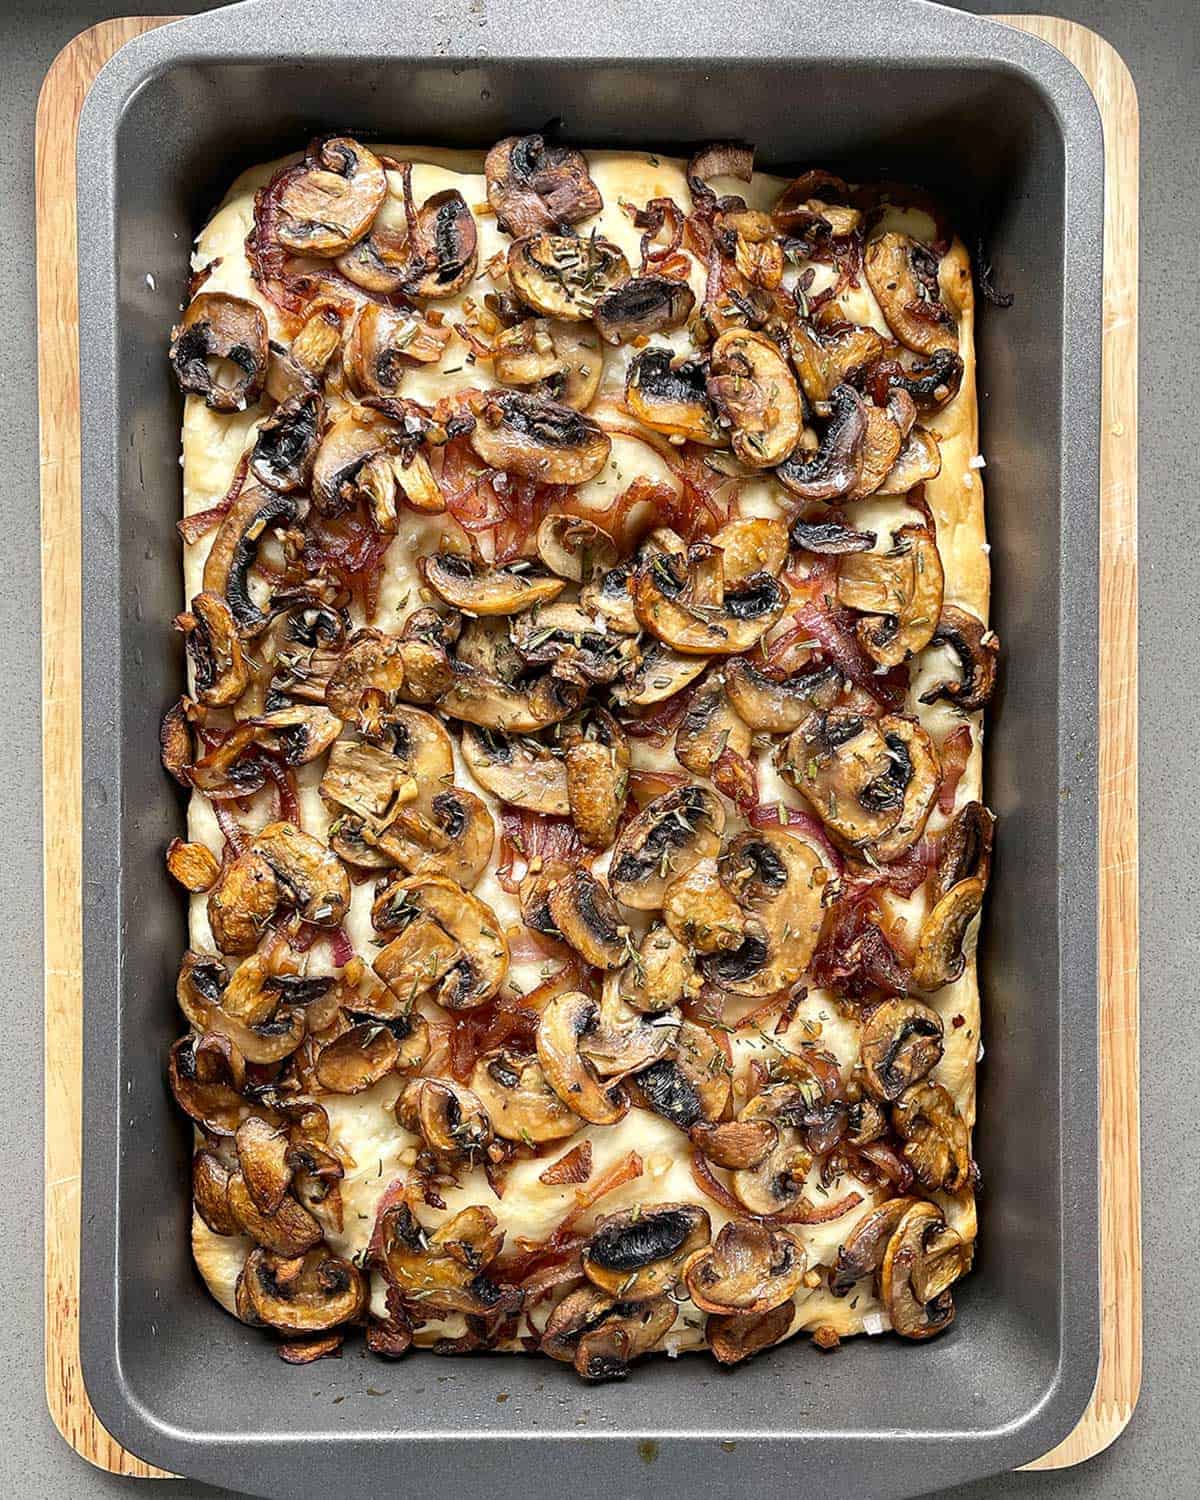 Cooked mushroom focaccia in a baking tray on wooden chopping board.